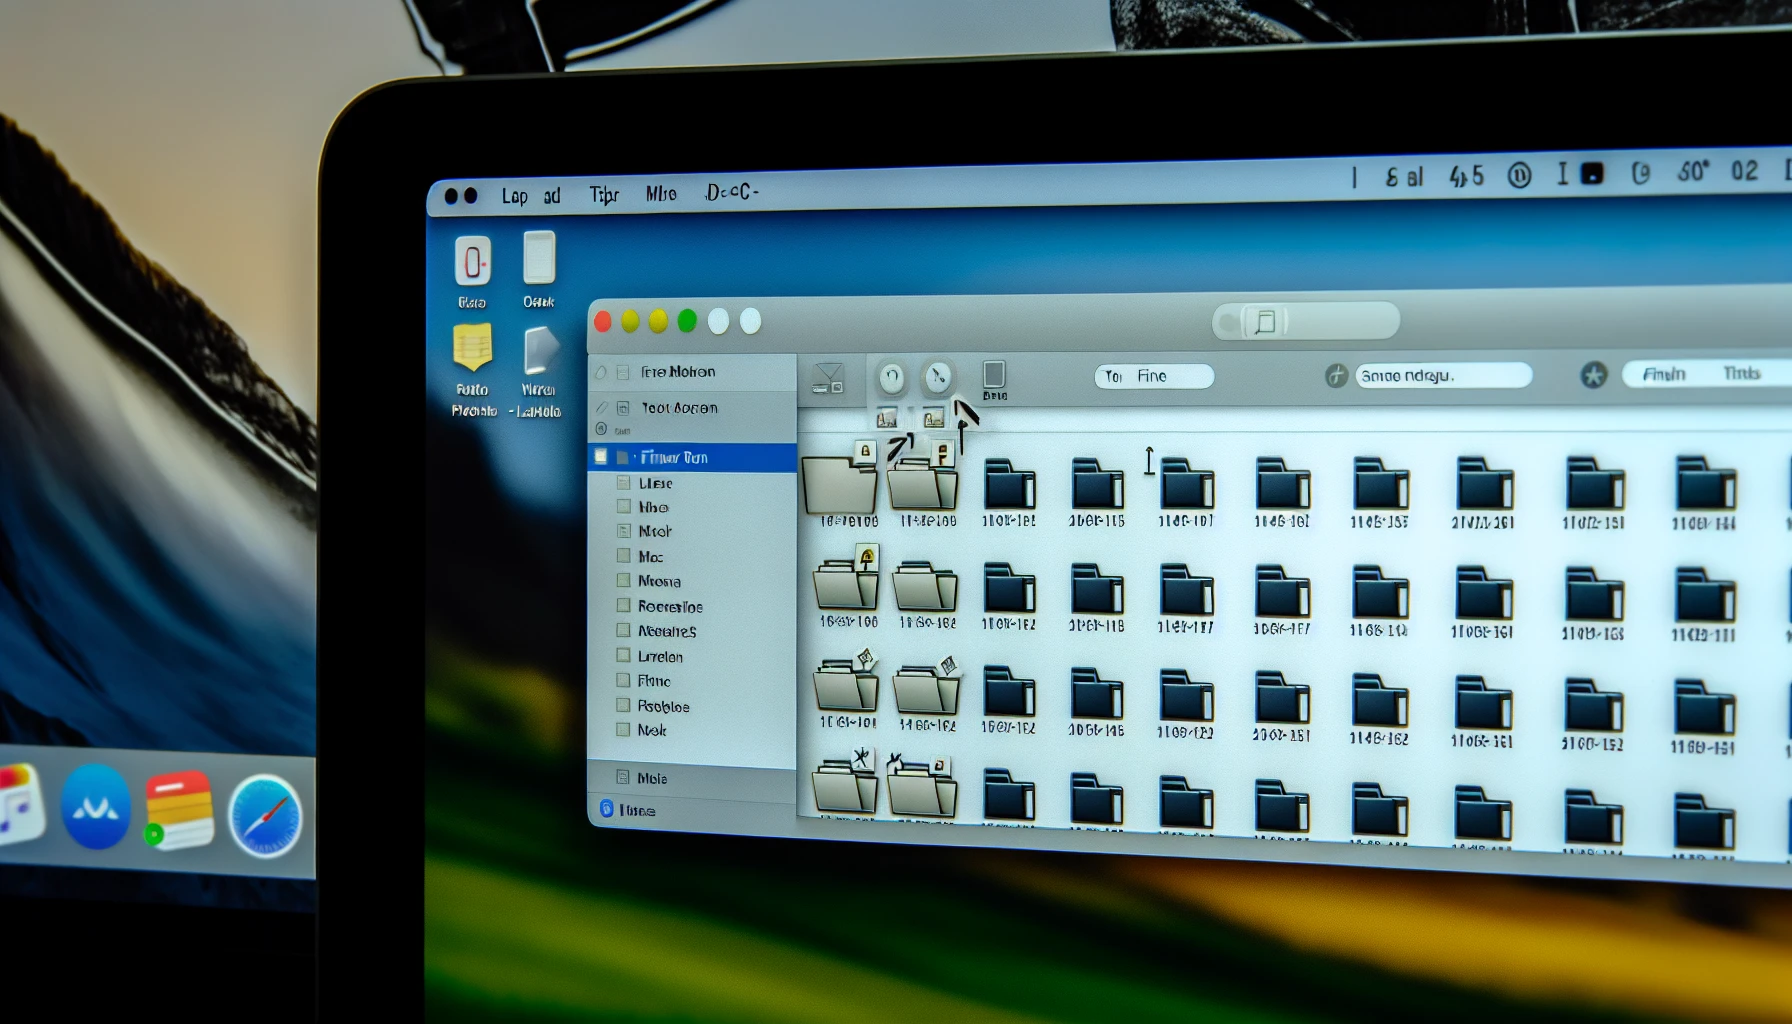 Finder window on a Mac for managing files and folders